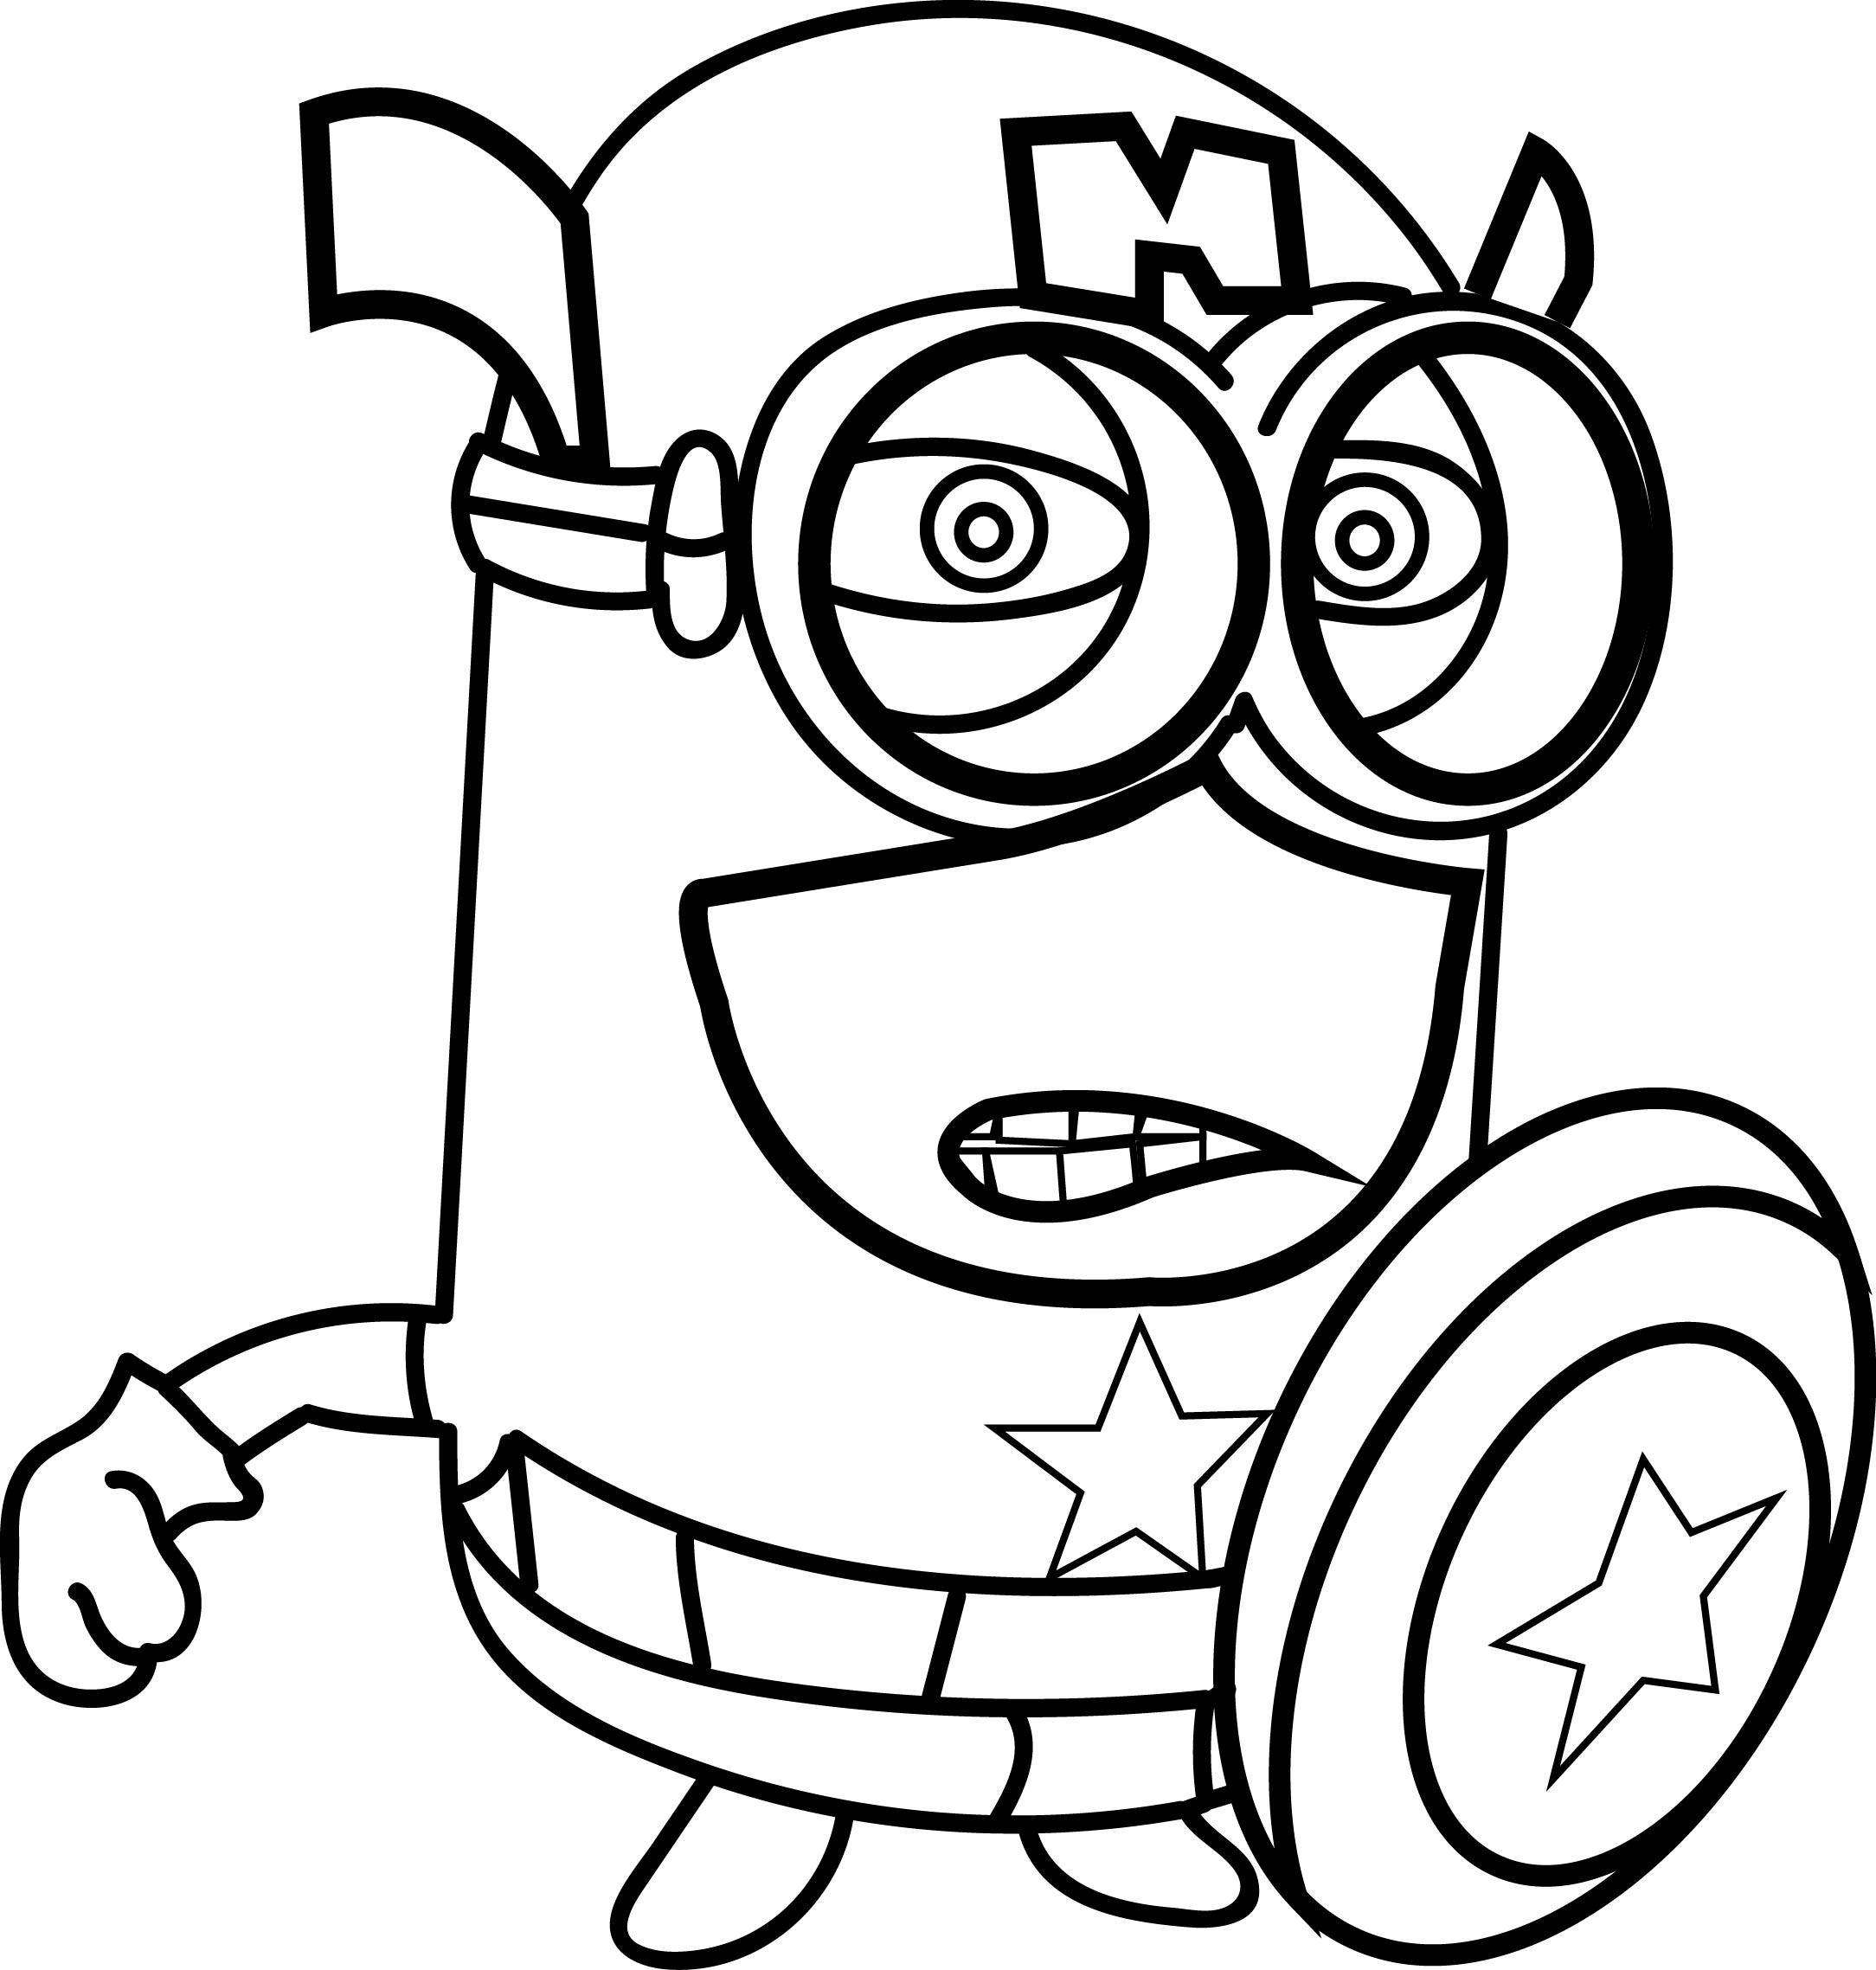 Minions Coloring Pages Printable
 Minion Coloring Pages Coloring Pages